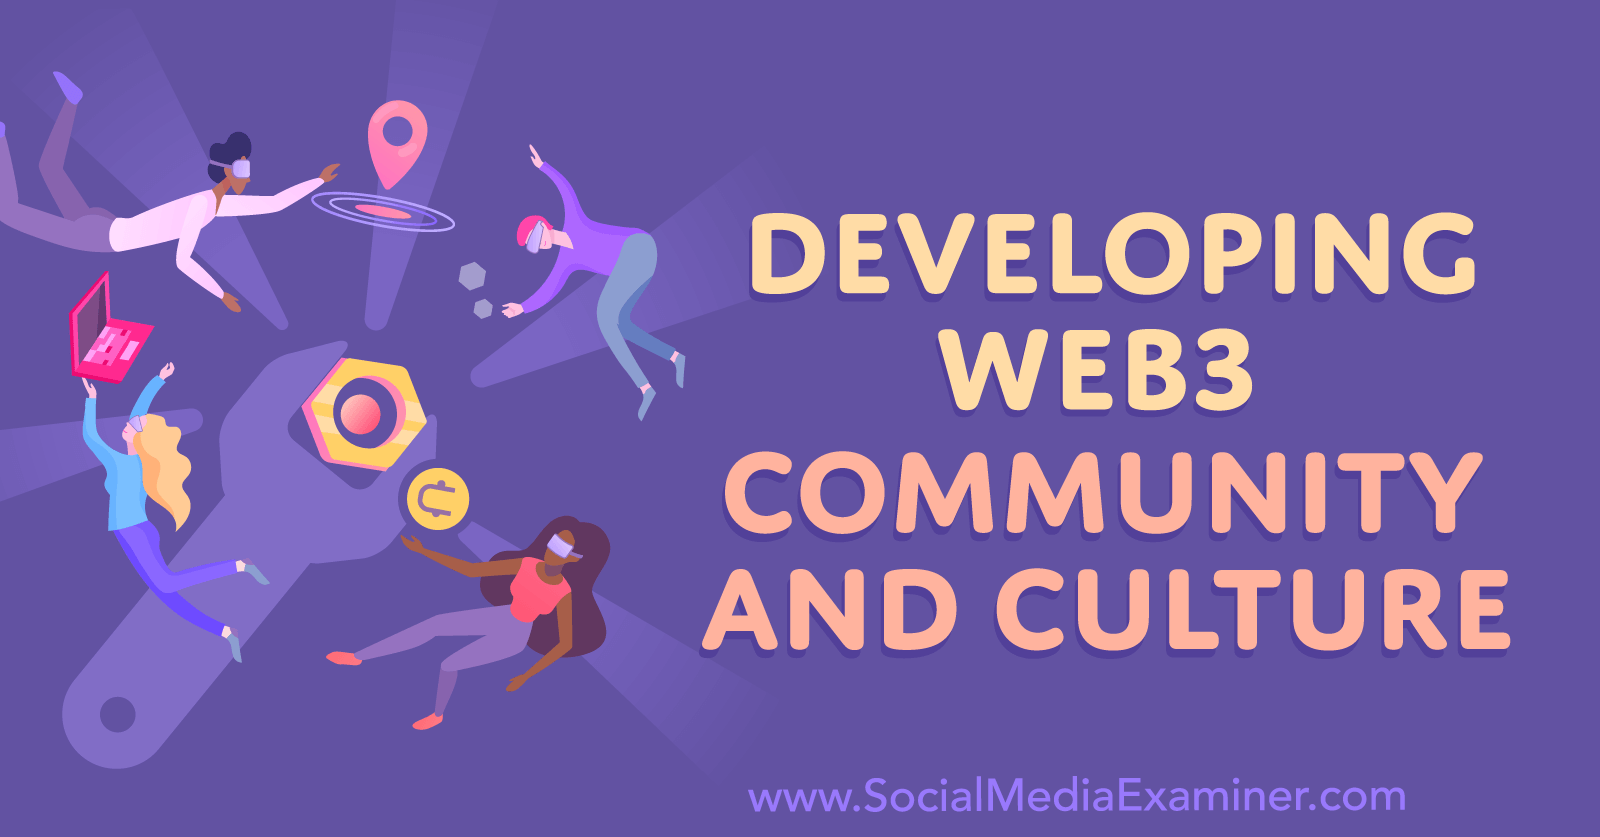 developing-web3-community-and-culture-by-social-media-examiner